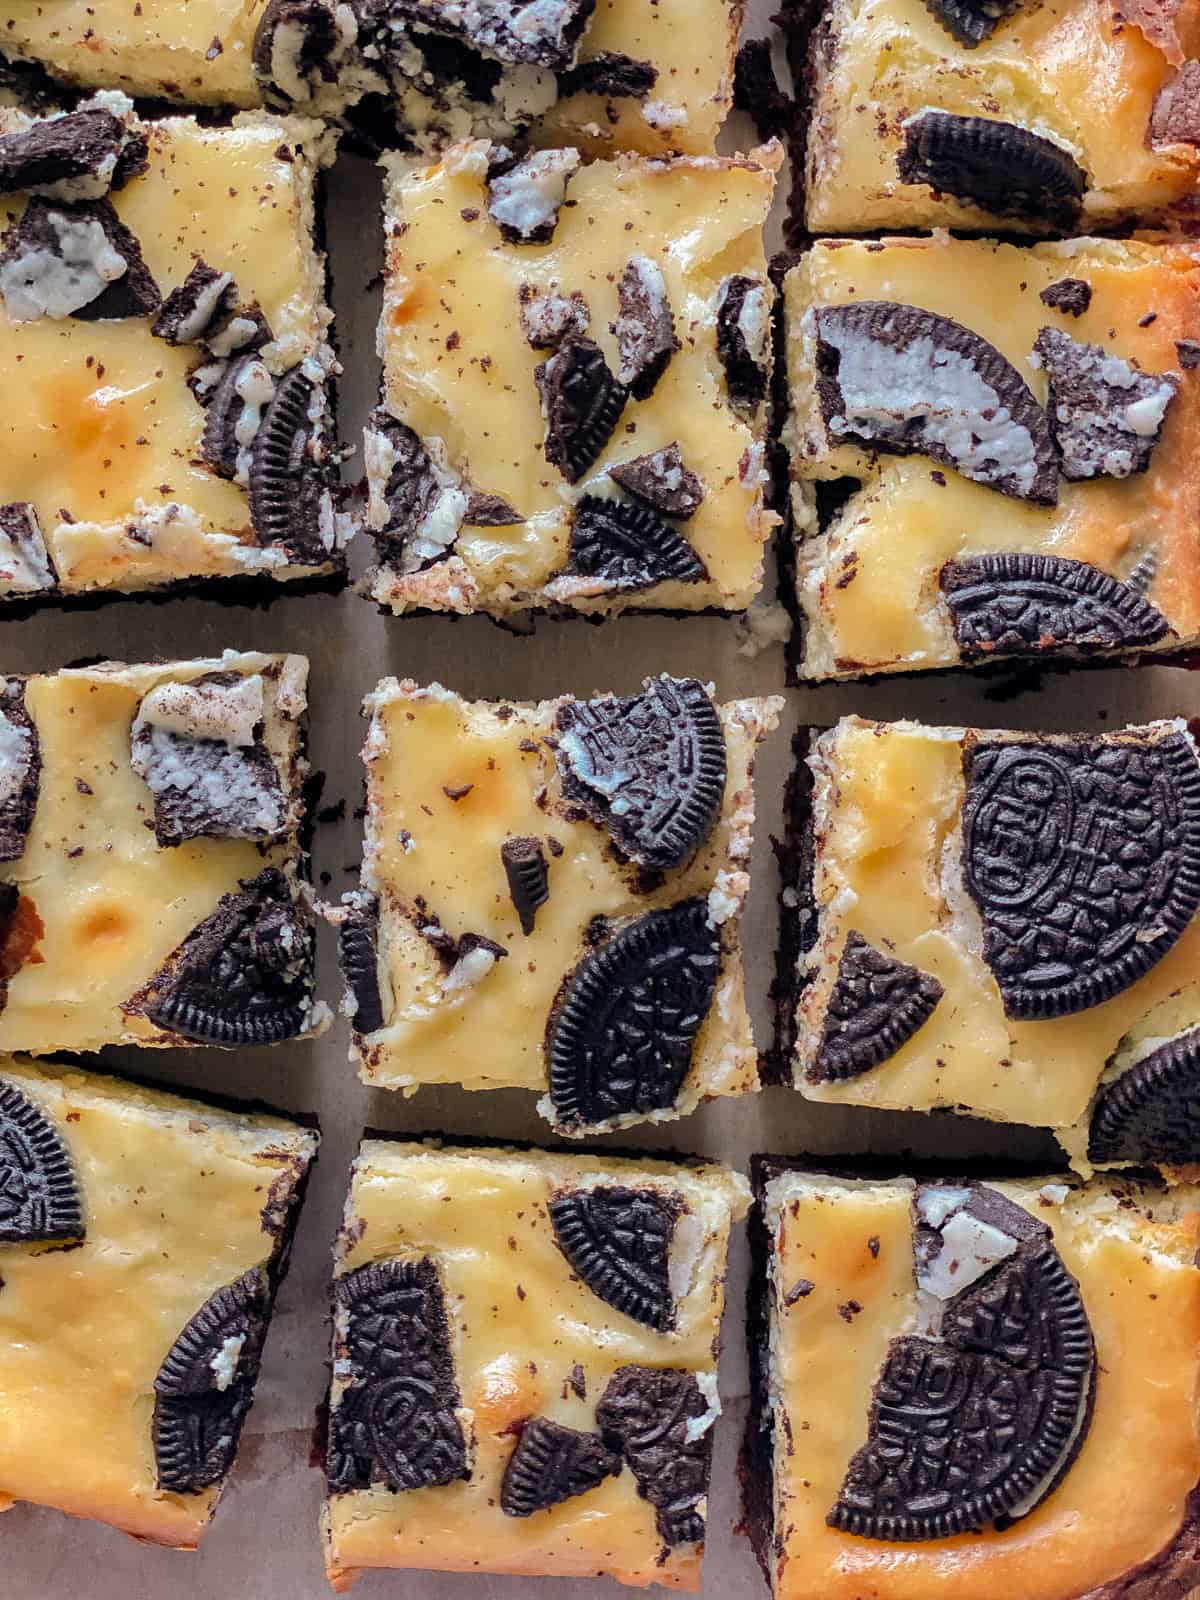 12 slices of cheesecake bars with Oreos crushed topped.